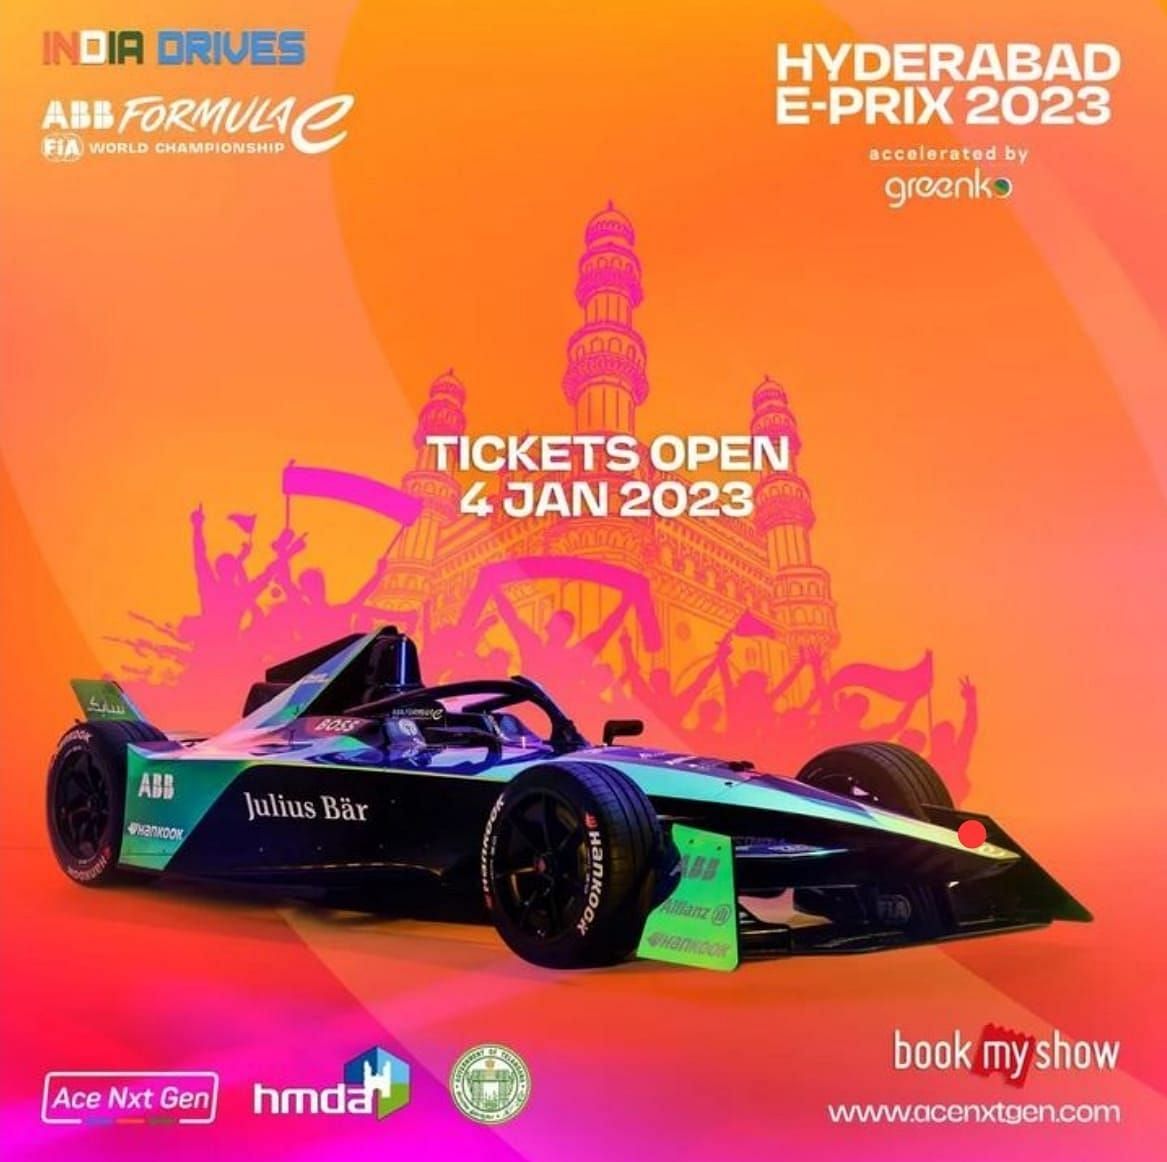 Tickets for 2023 Hyderabad E-Prix are now available online